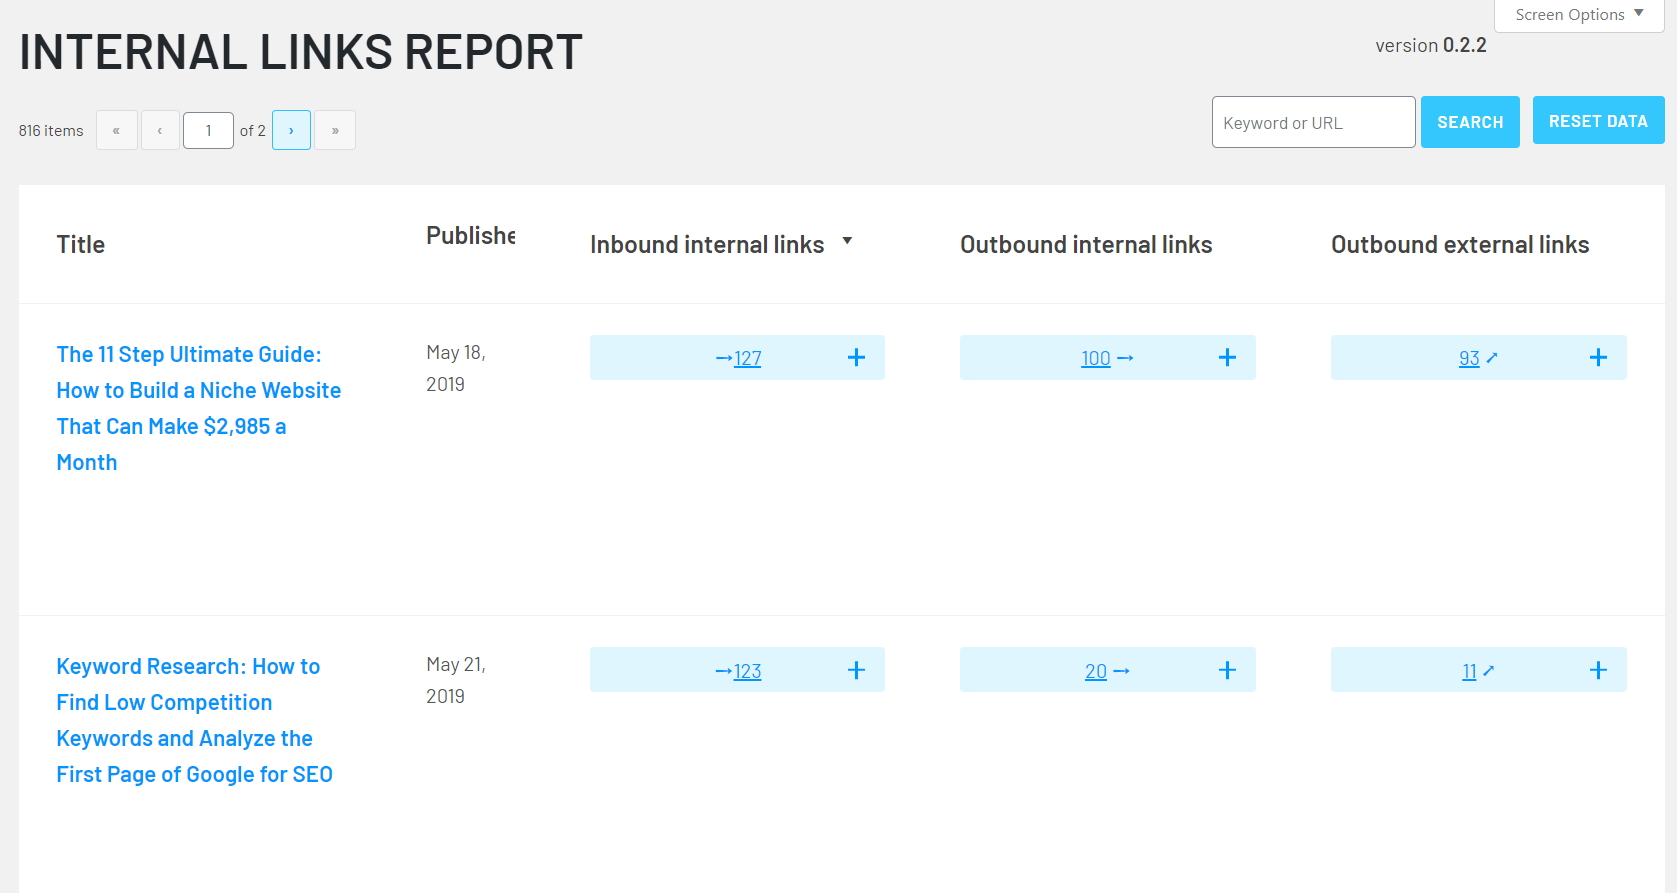 The Linking Report shows you at a glance how connected your site's pages are.